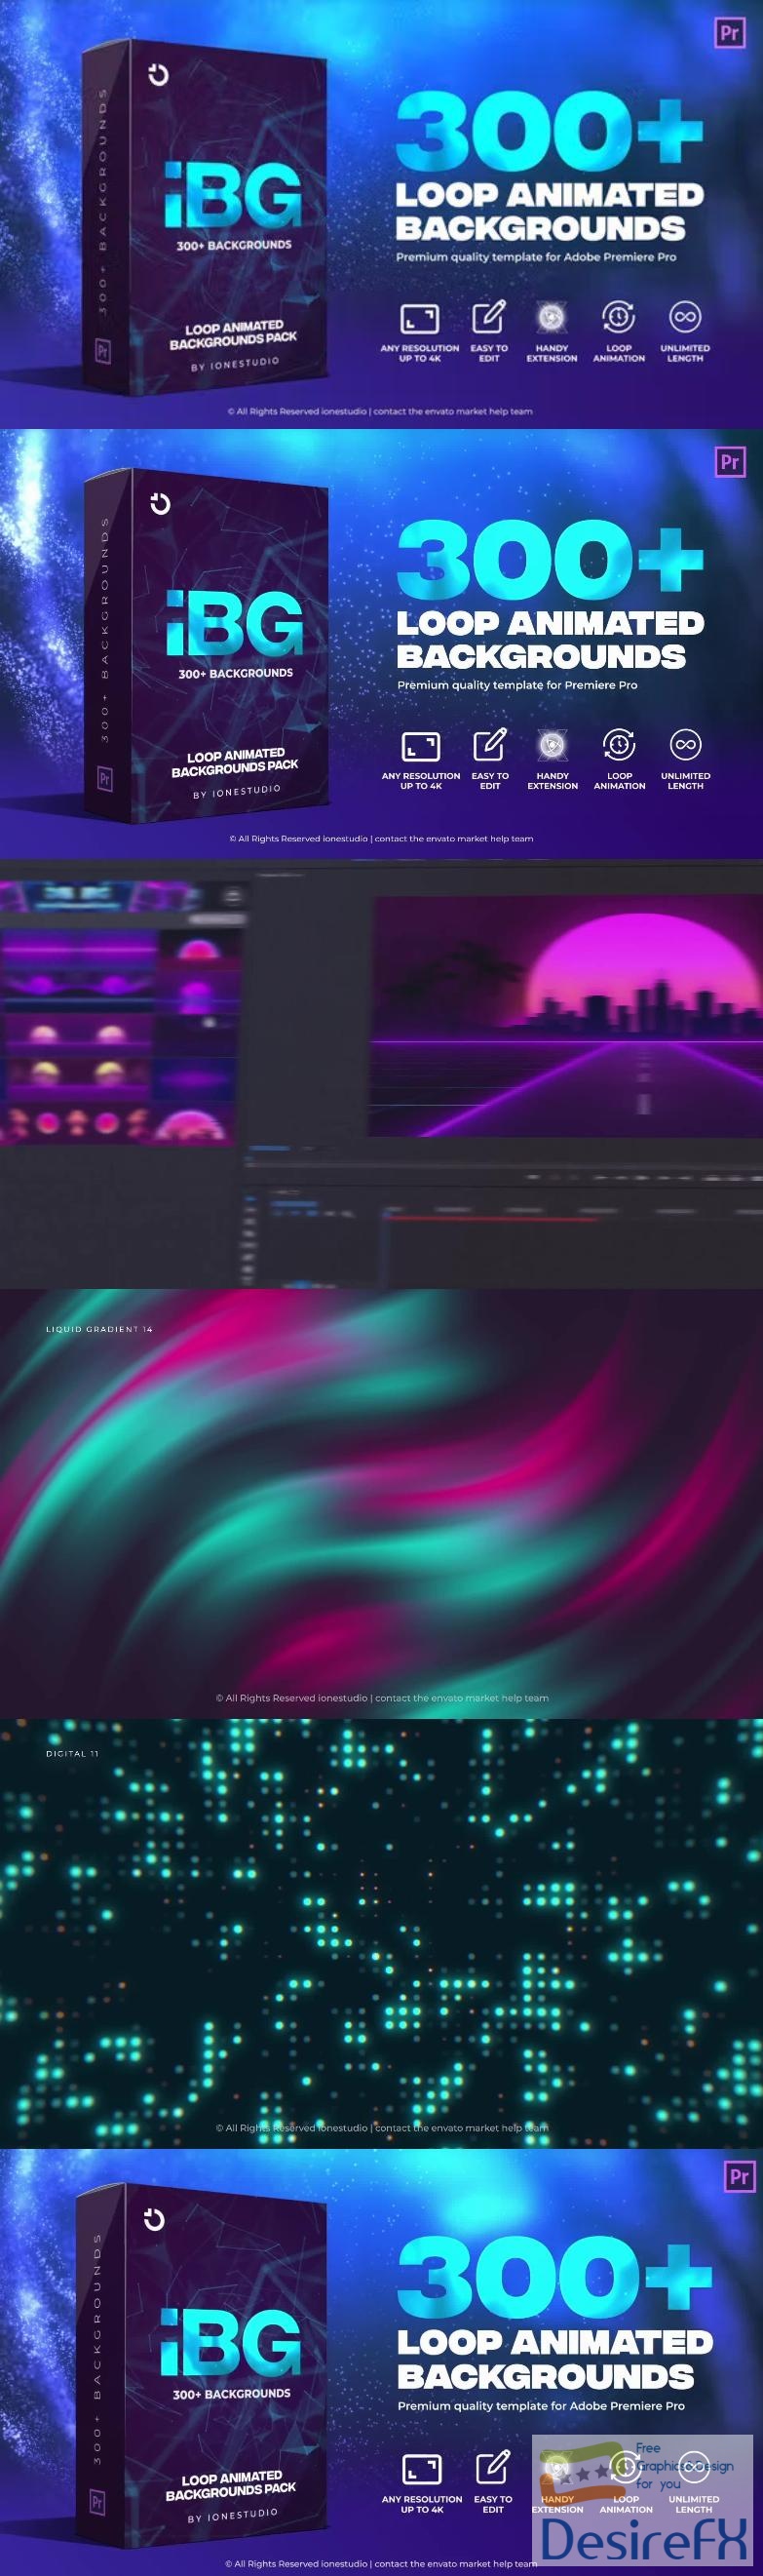 Videohive iBG 300+ Loop Backgrounds for Premiere Pro 35904445